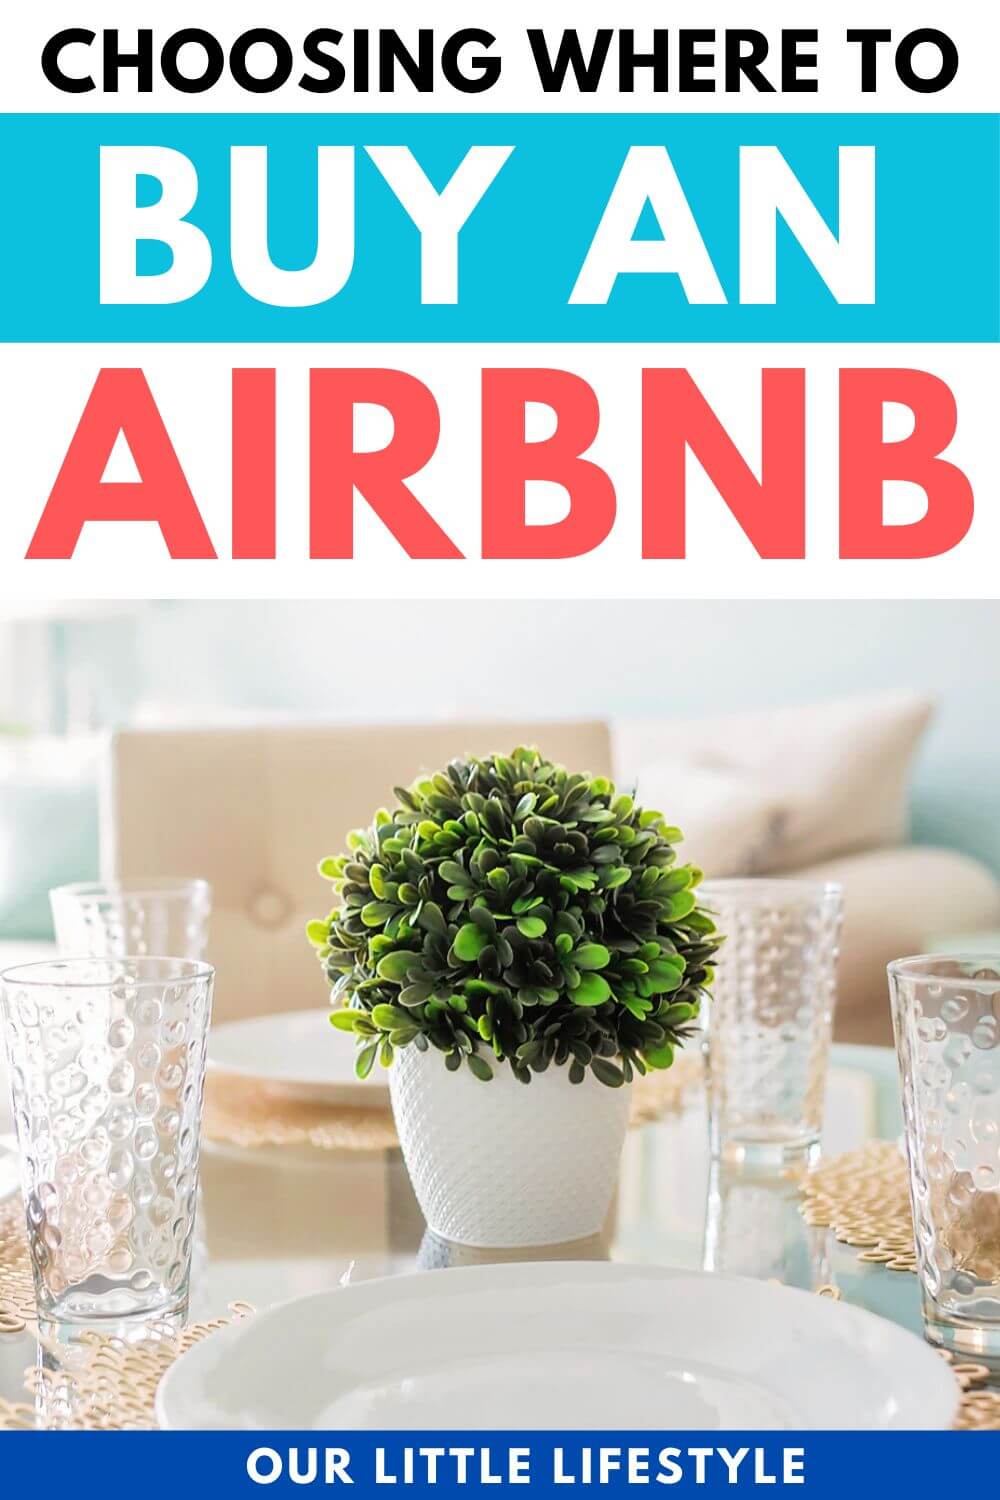 Choosing a location for your first Airbnb STR property